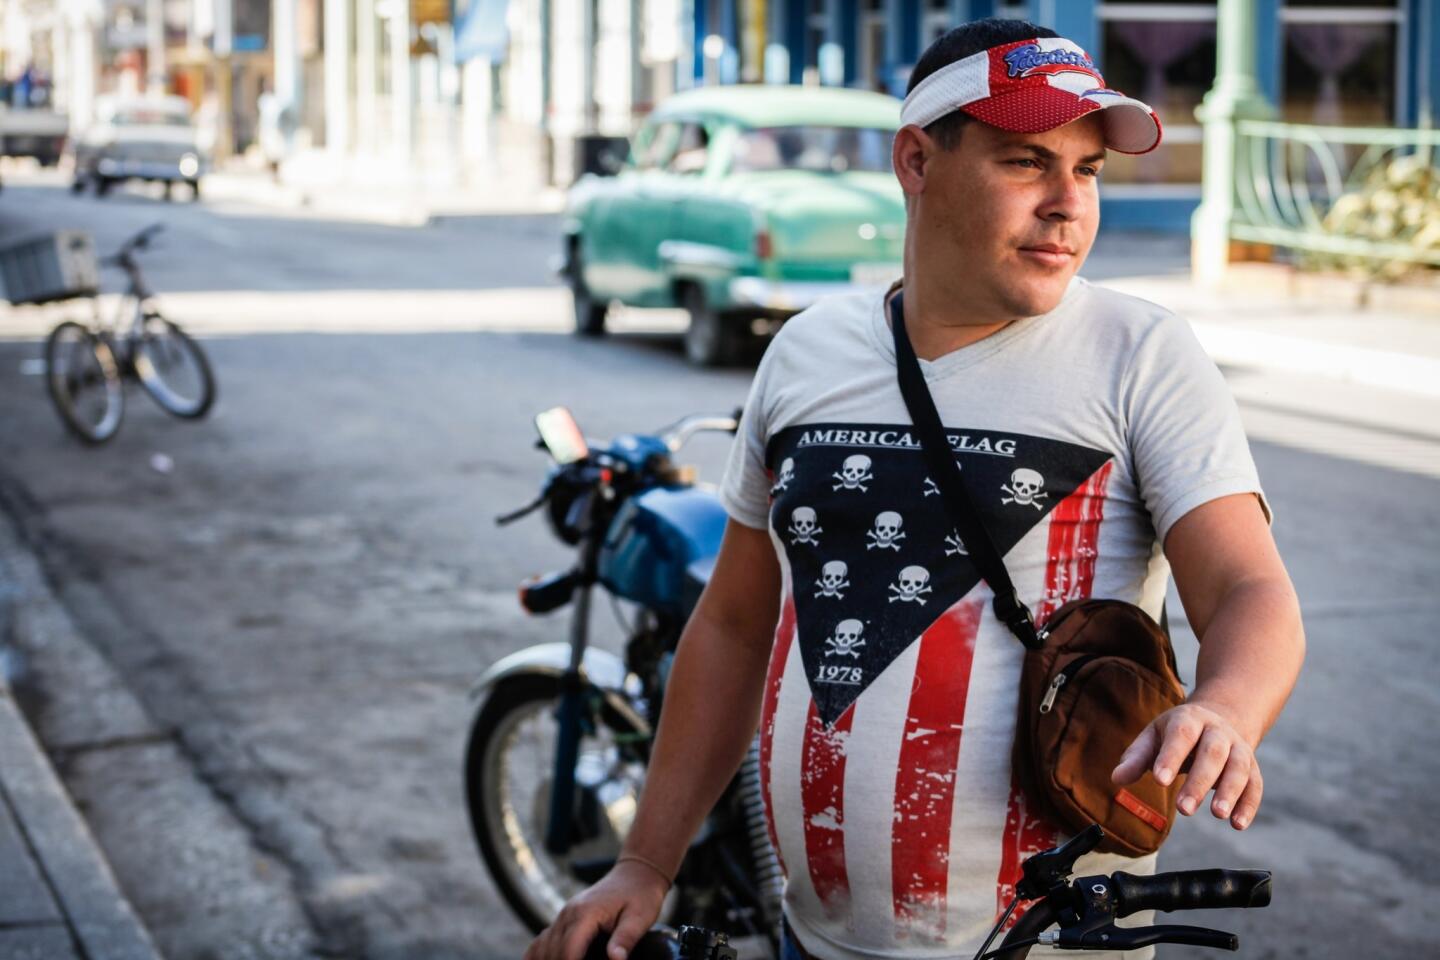 A man wears a T-shirt in the colors of the United States flag in a street of Guantanamo, Cuba, some 27 km from Guantanamo Naval Base, on March 12, 2016.